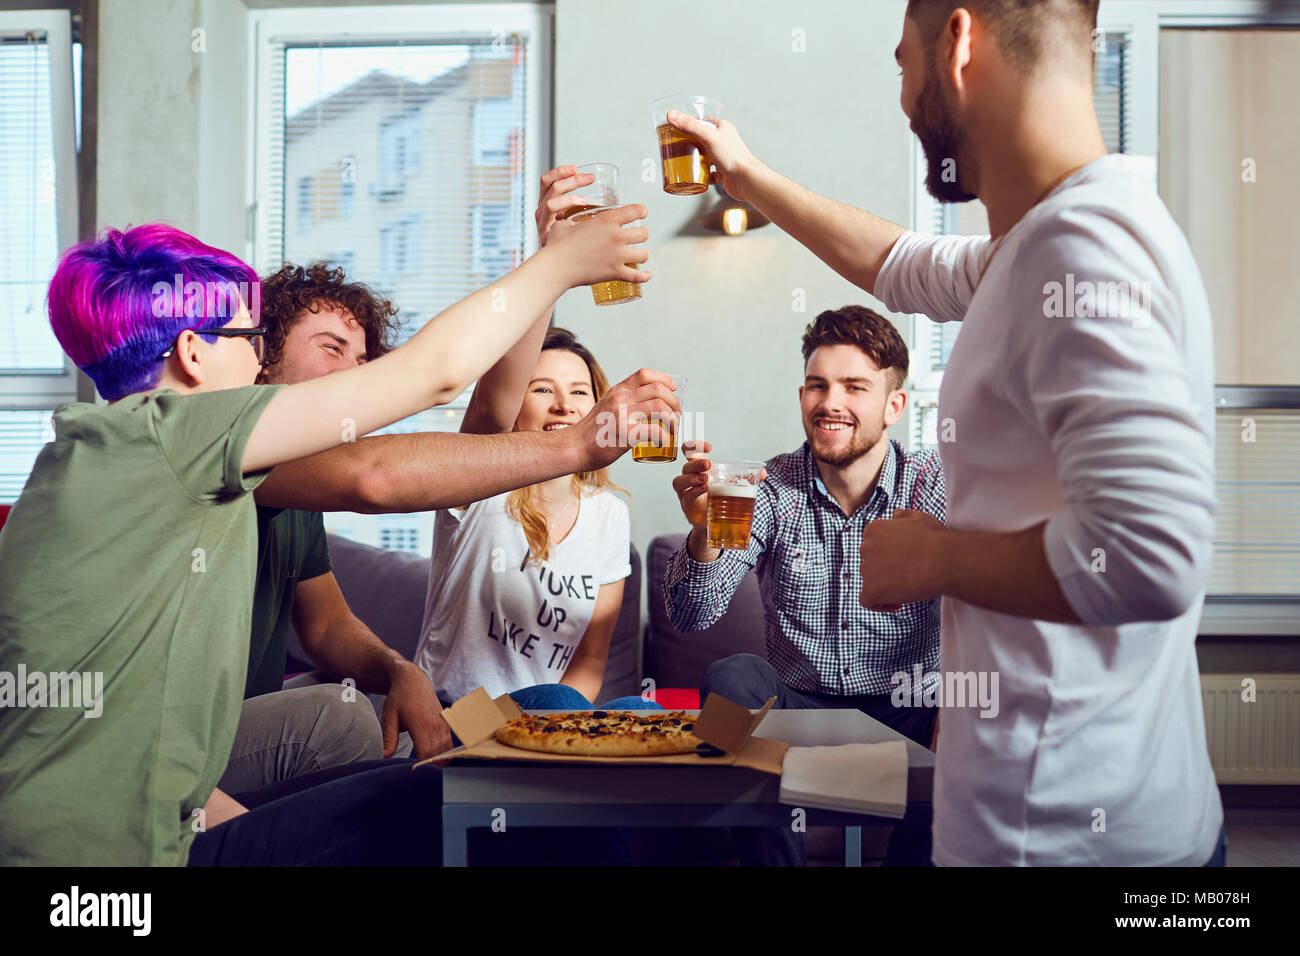 A group of friends is clinking glasses with beer. Stock Photo